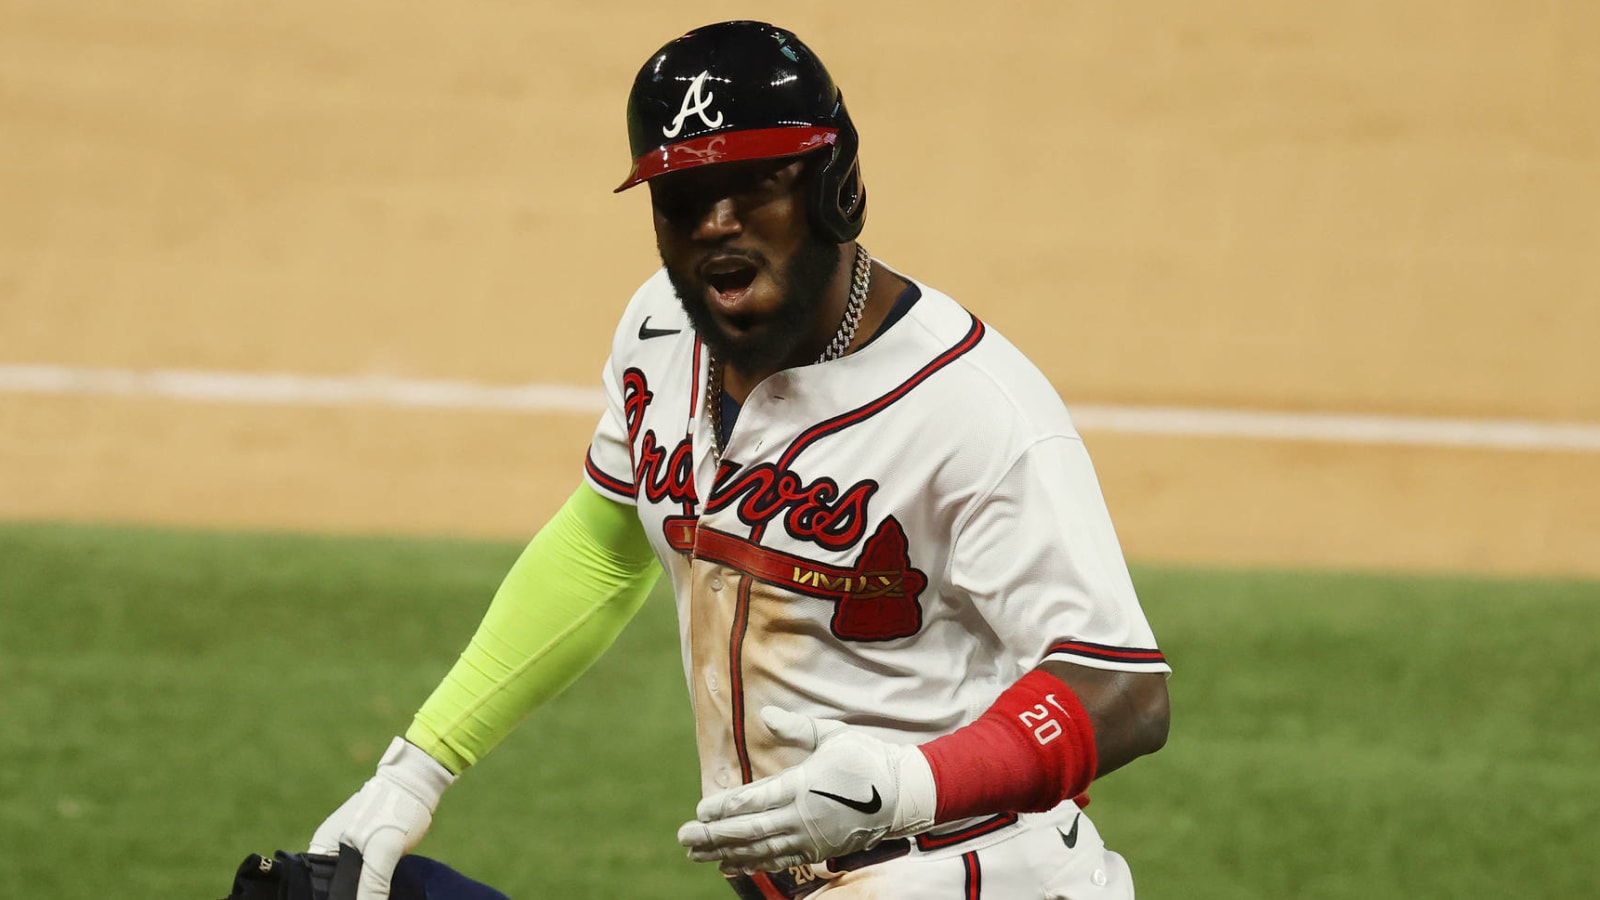 Braves re-sign Marcell Ozuna to four-year, $64M deal